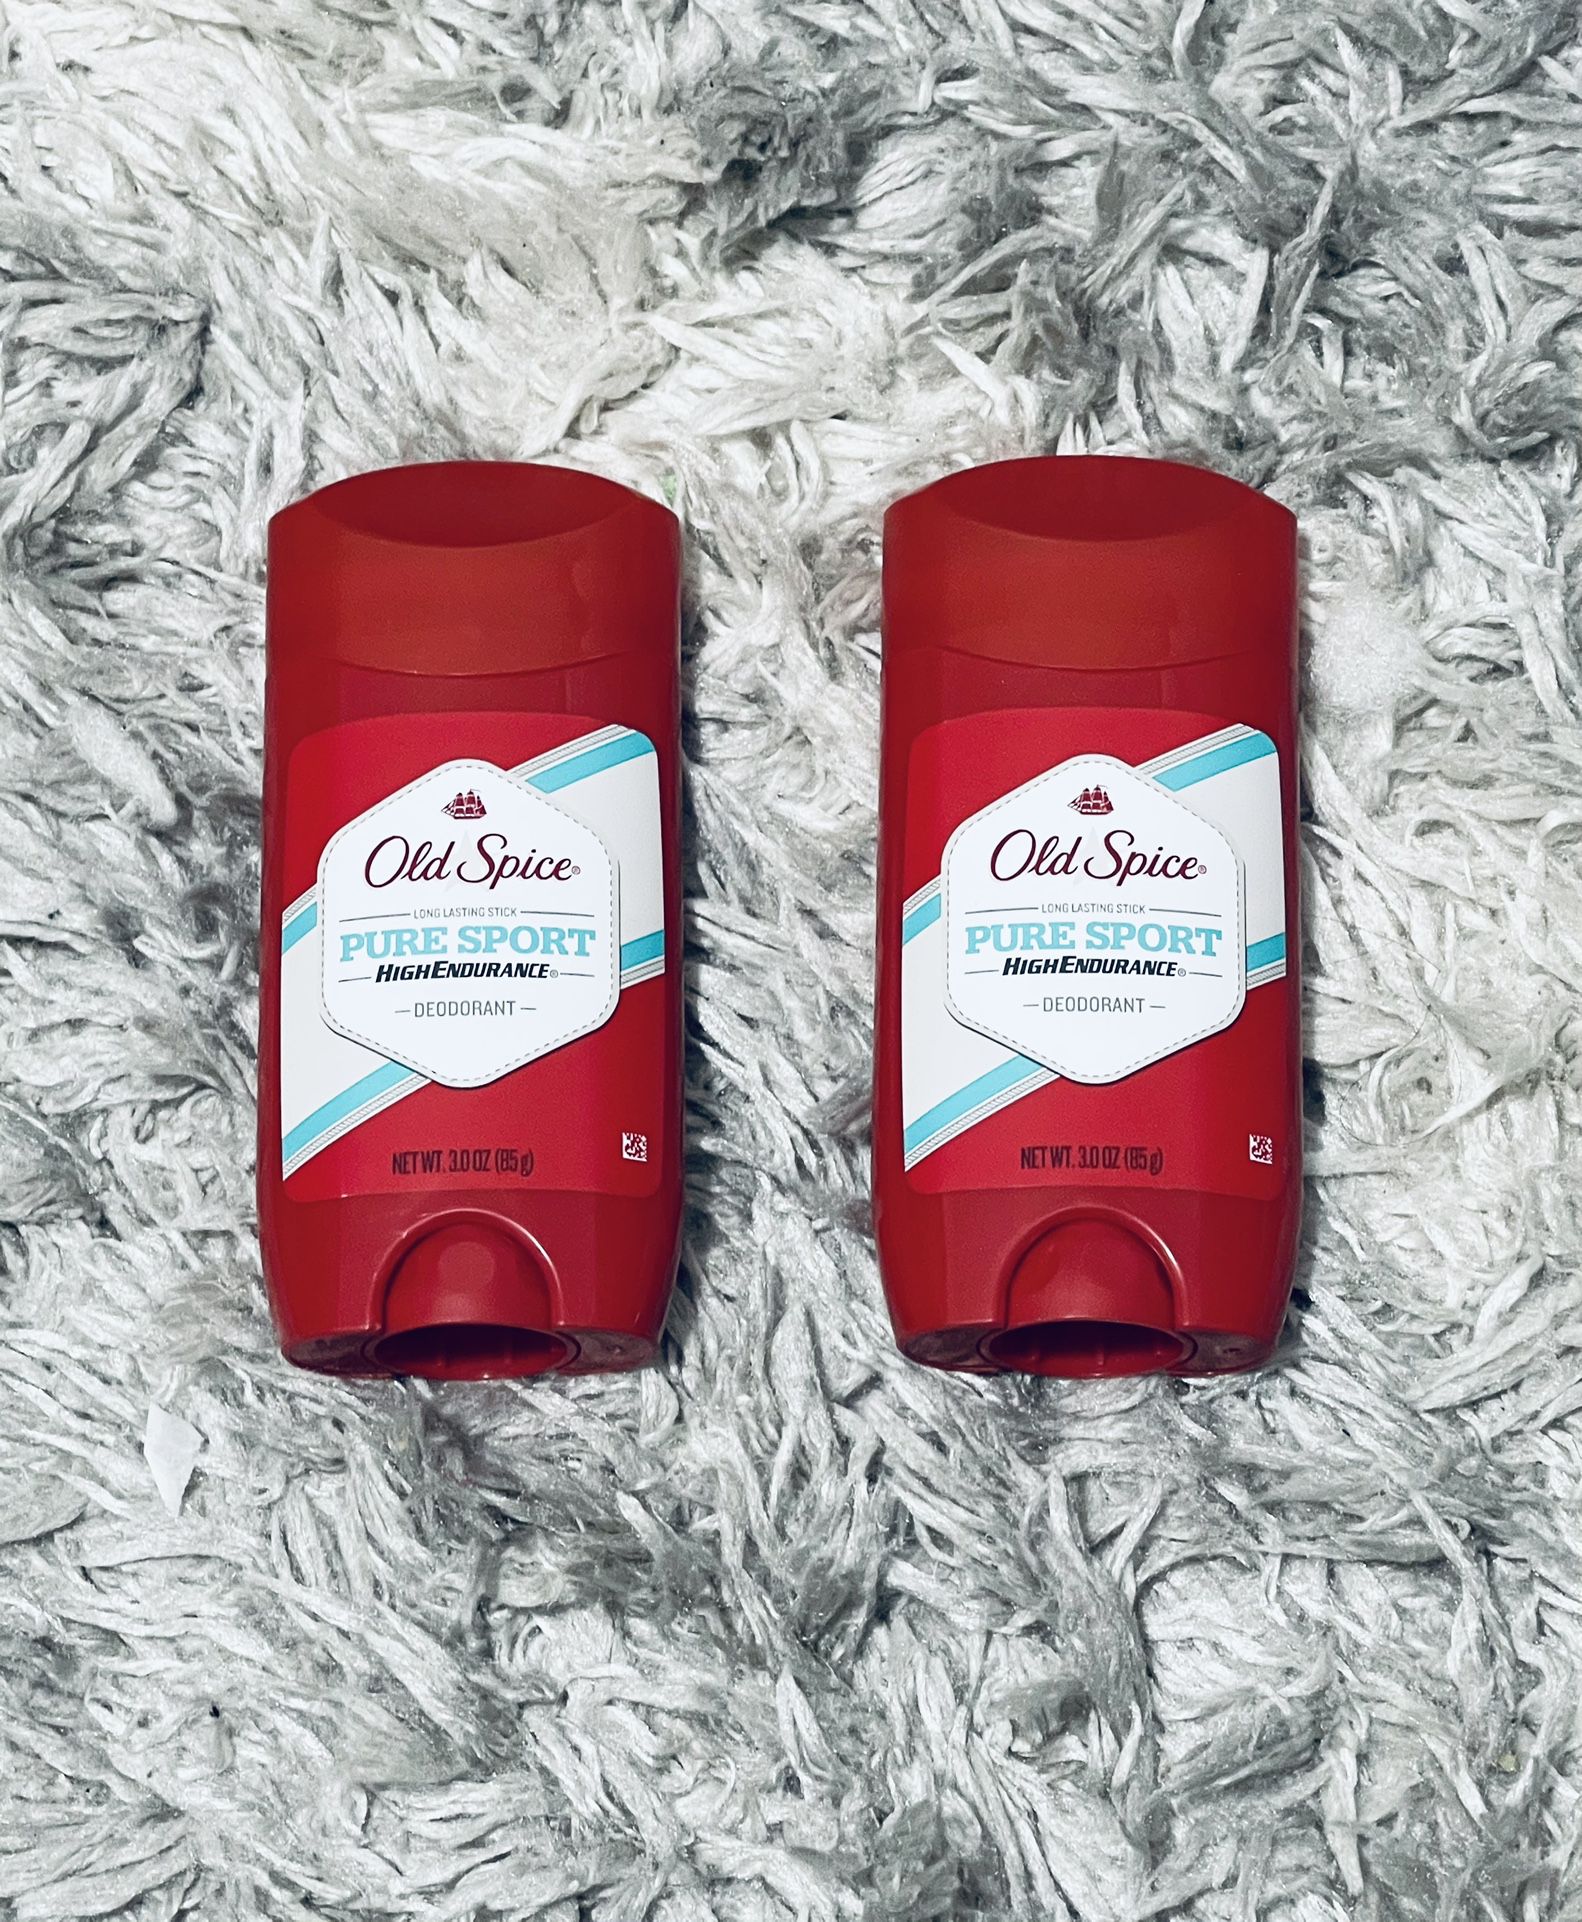 Old Spice Pure Sport Deodorant 